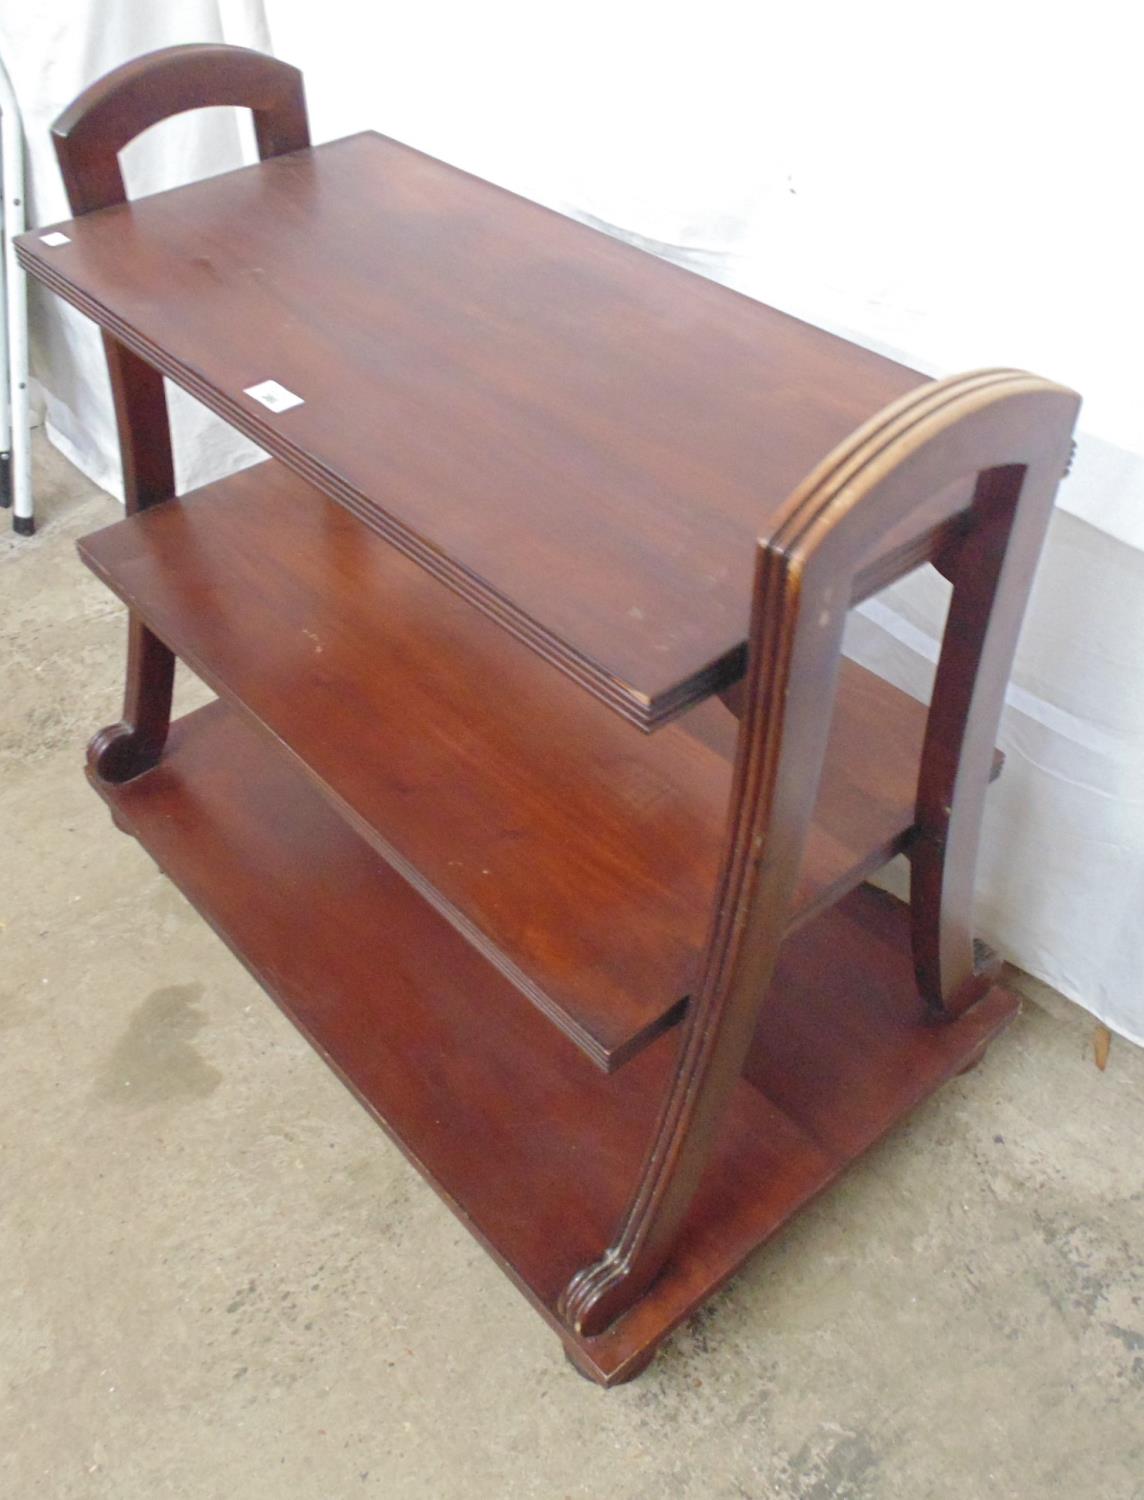 Reproduction mahogany dumb waiter having three graduated tiers united by arched supports, standing - Image 2 of 2